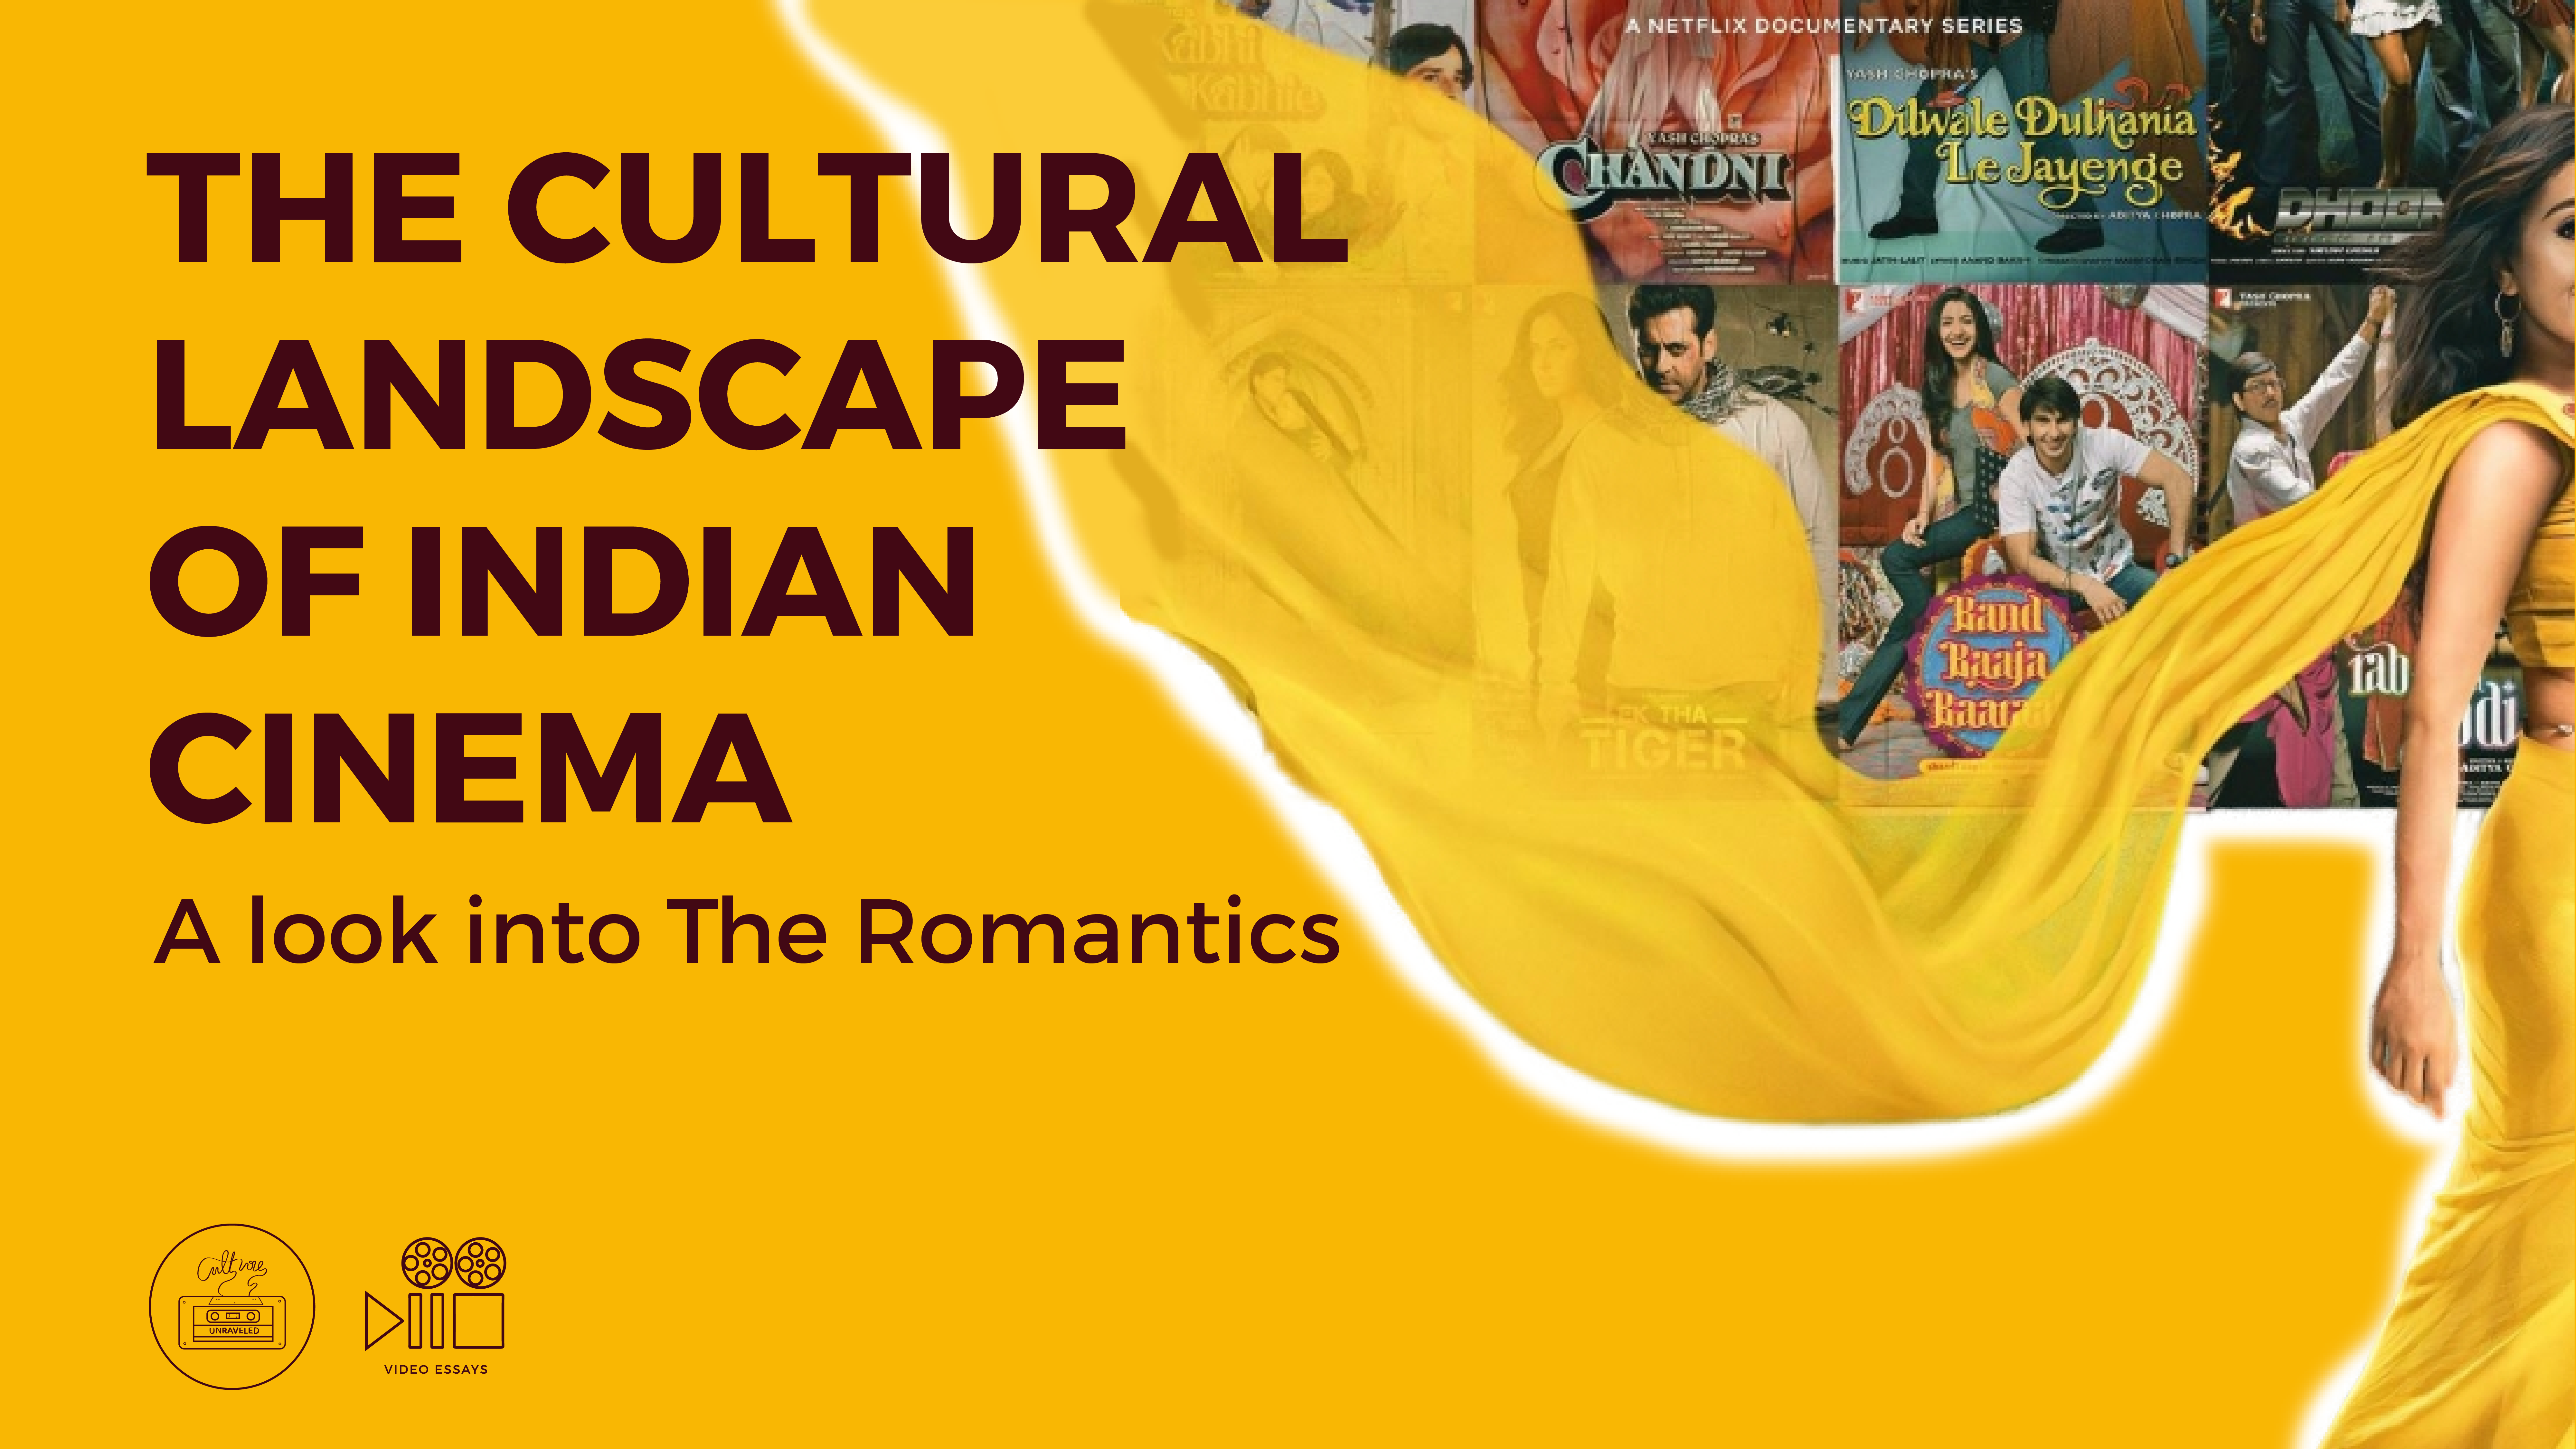 The Cultural Landscape of Indian Cinema. A Look into The Romantics